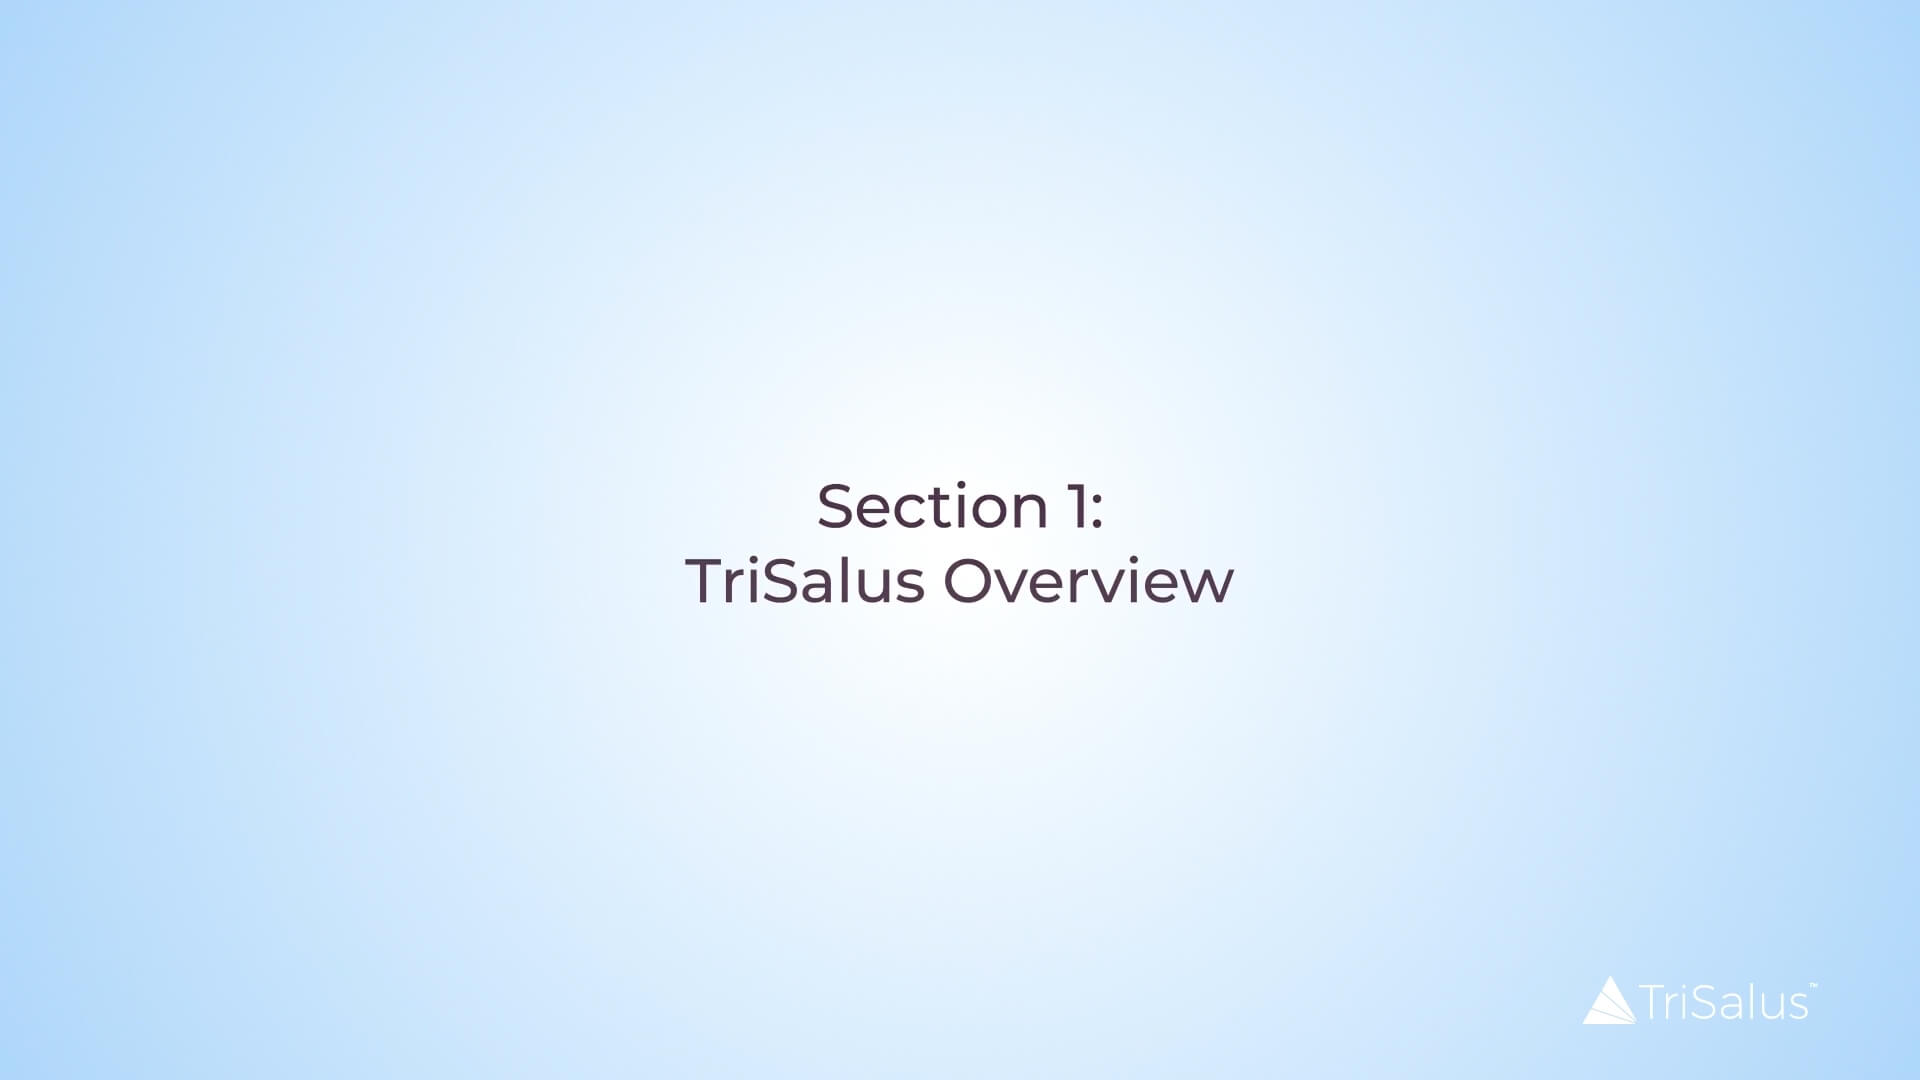 Video Thumbnail with text: Section 1: TriSalus Overview